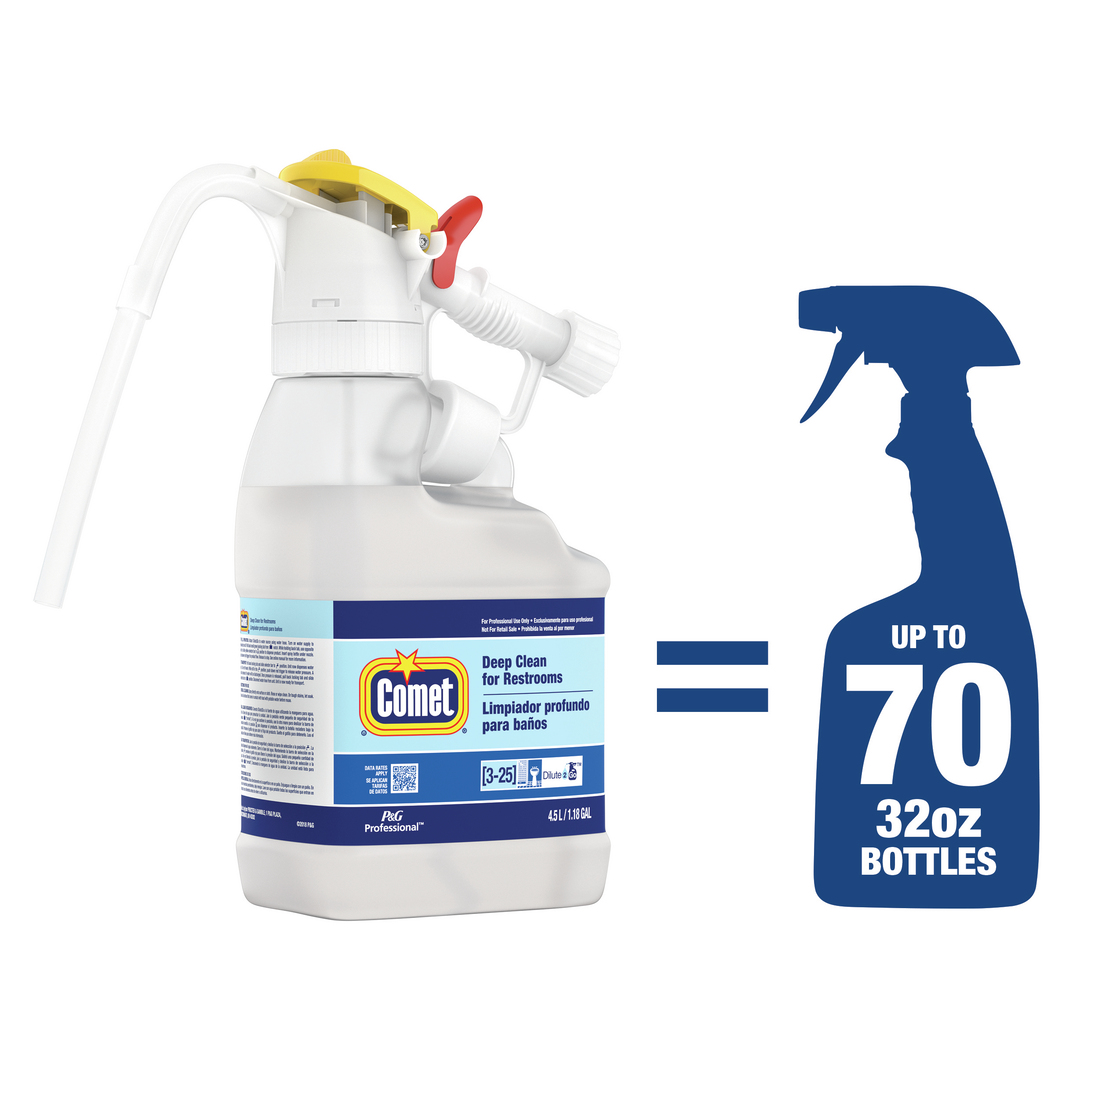 Dilute2Go - Comet Deep Clean | P&G Professional